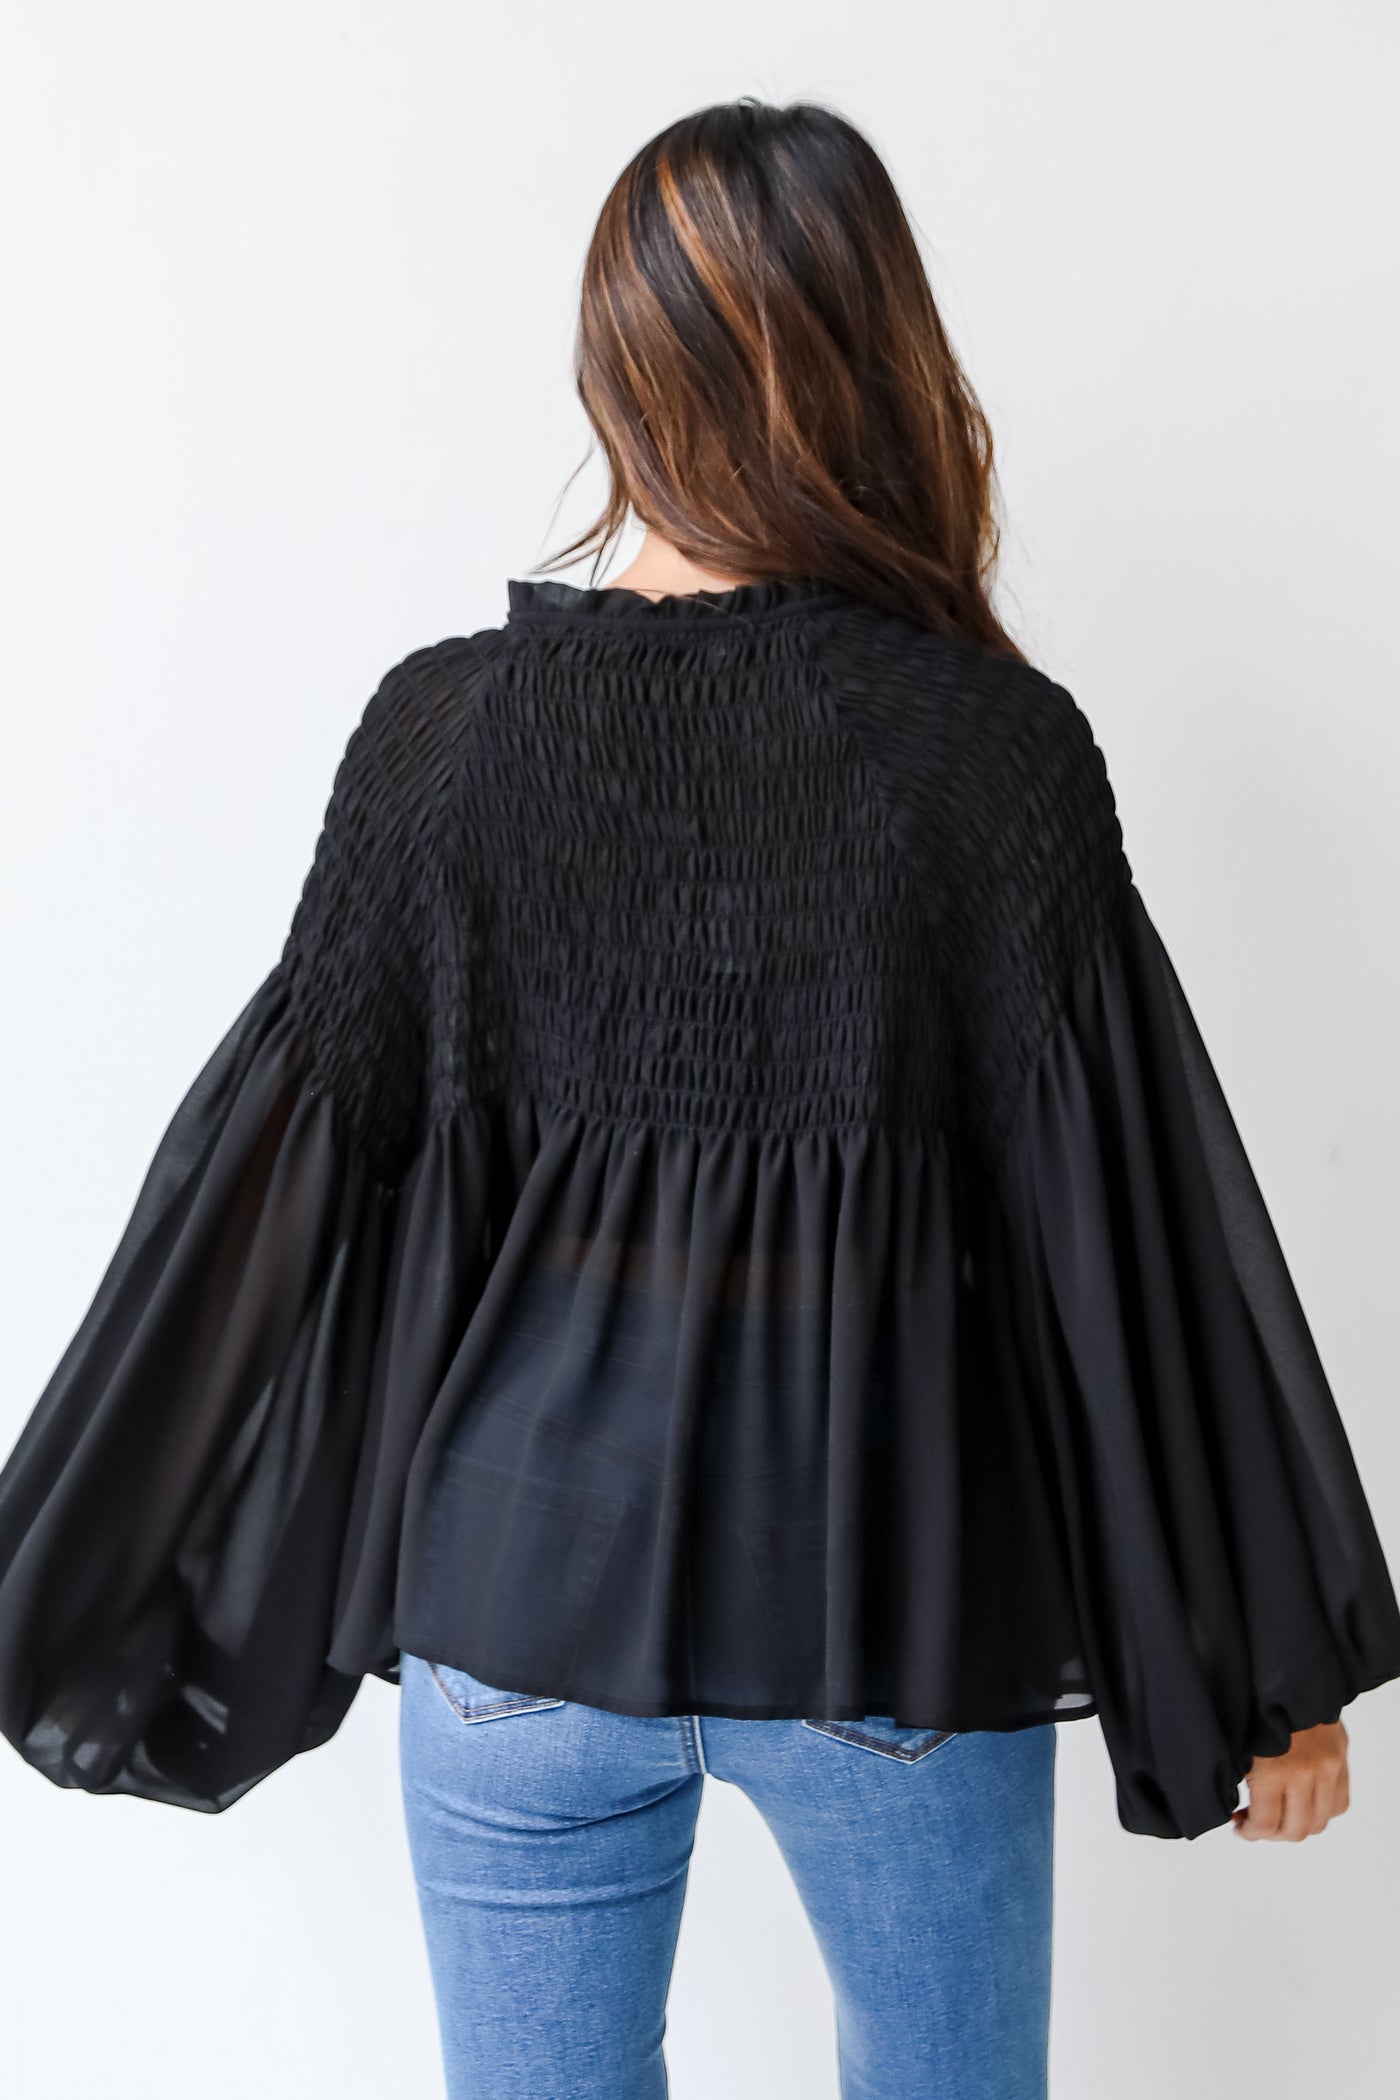 Smocked Blouse in black back view